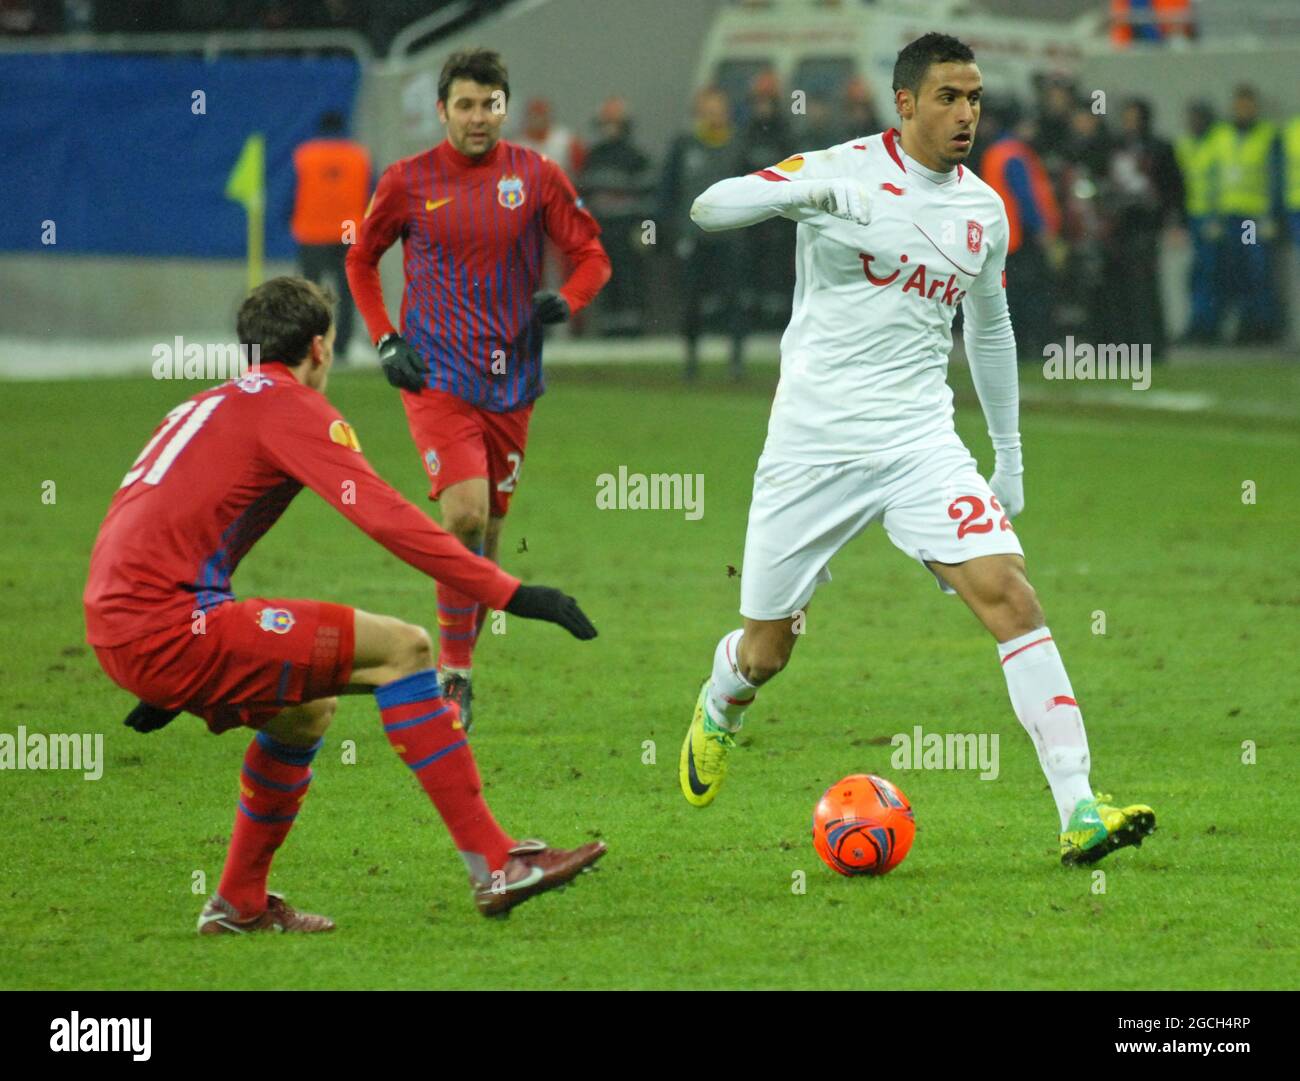 BUCHAREST, ROMANIA - FEBRUARY 16, 2012: Nacer Chadli (R) of Twente pictured in action during the first leg of the 2011/12 UEFA Europa League Round of 32 game between FCSB and FC Twente at National Arena. Stock Photo